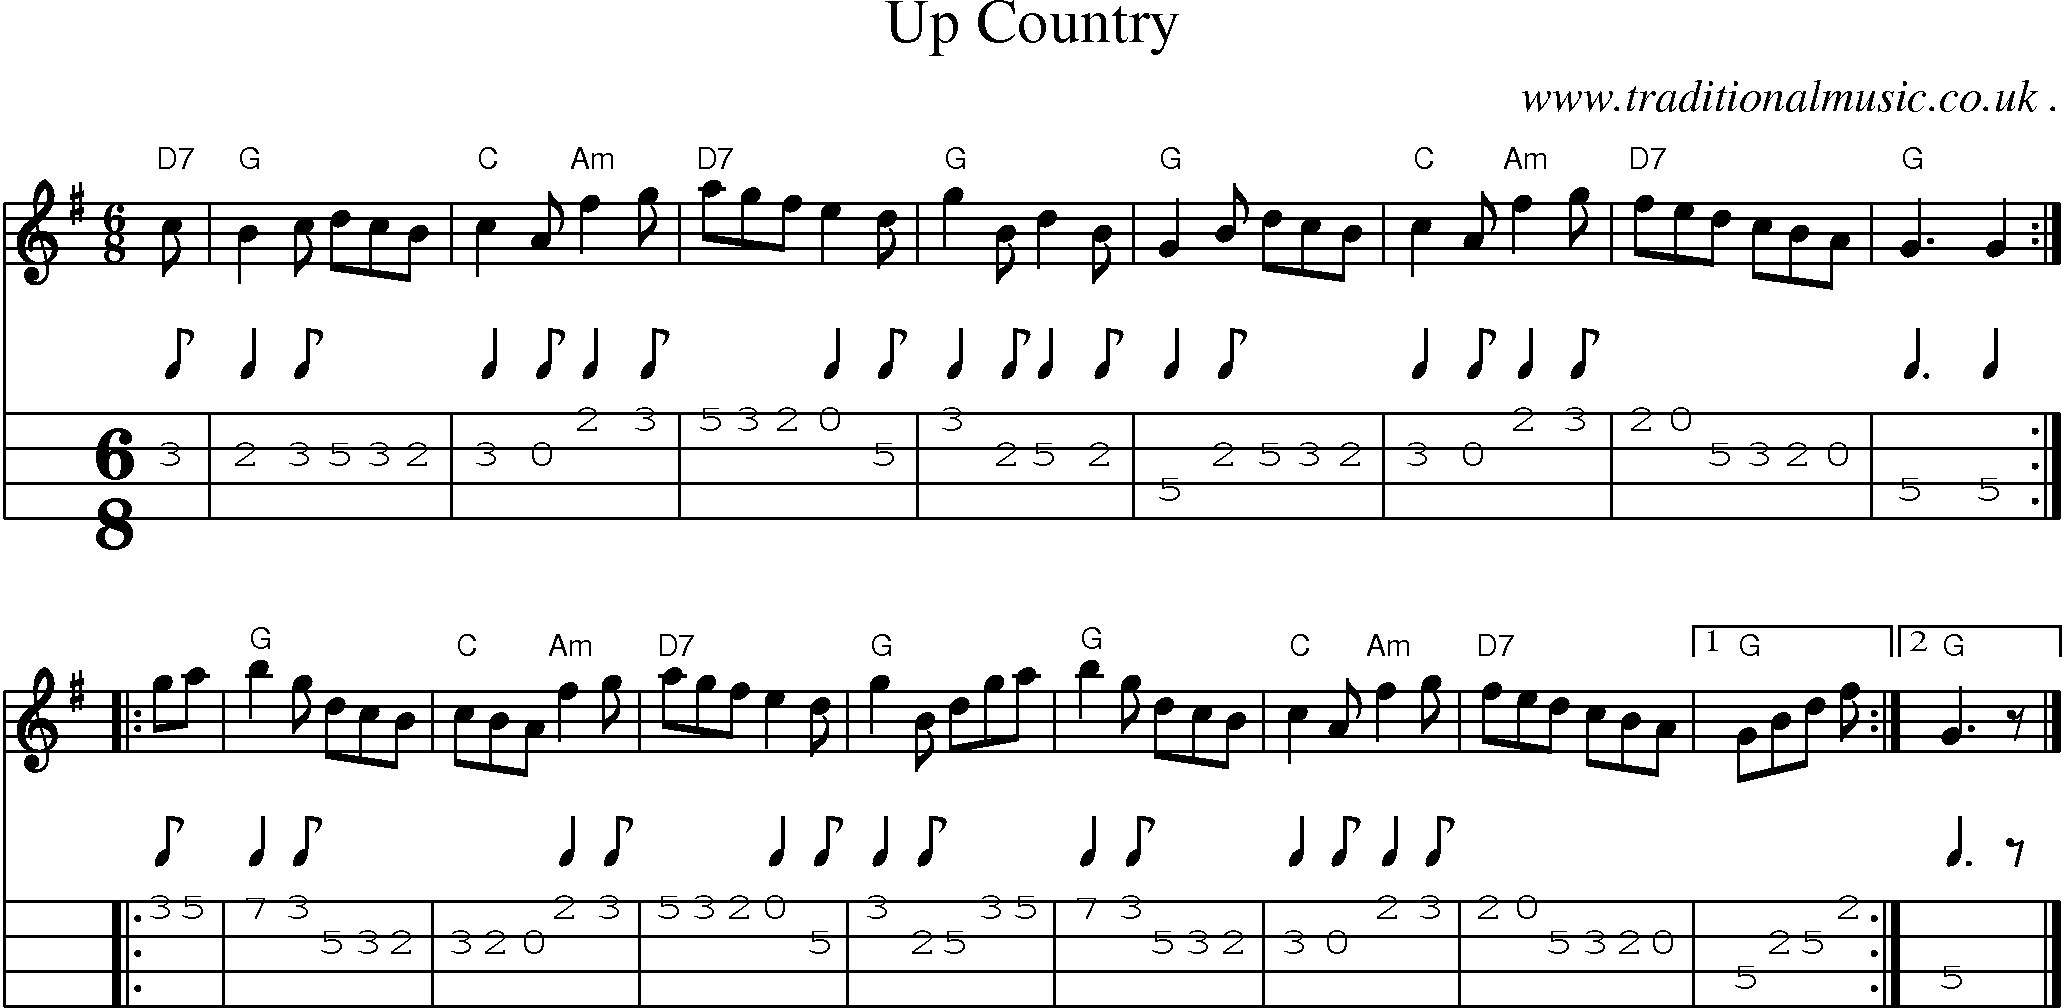 Sheet-music  score, Chords and Mandolin Tabs for Up Country